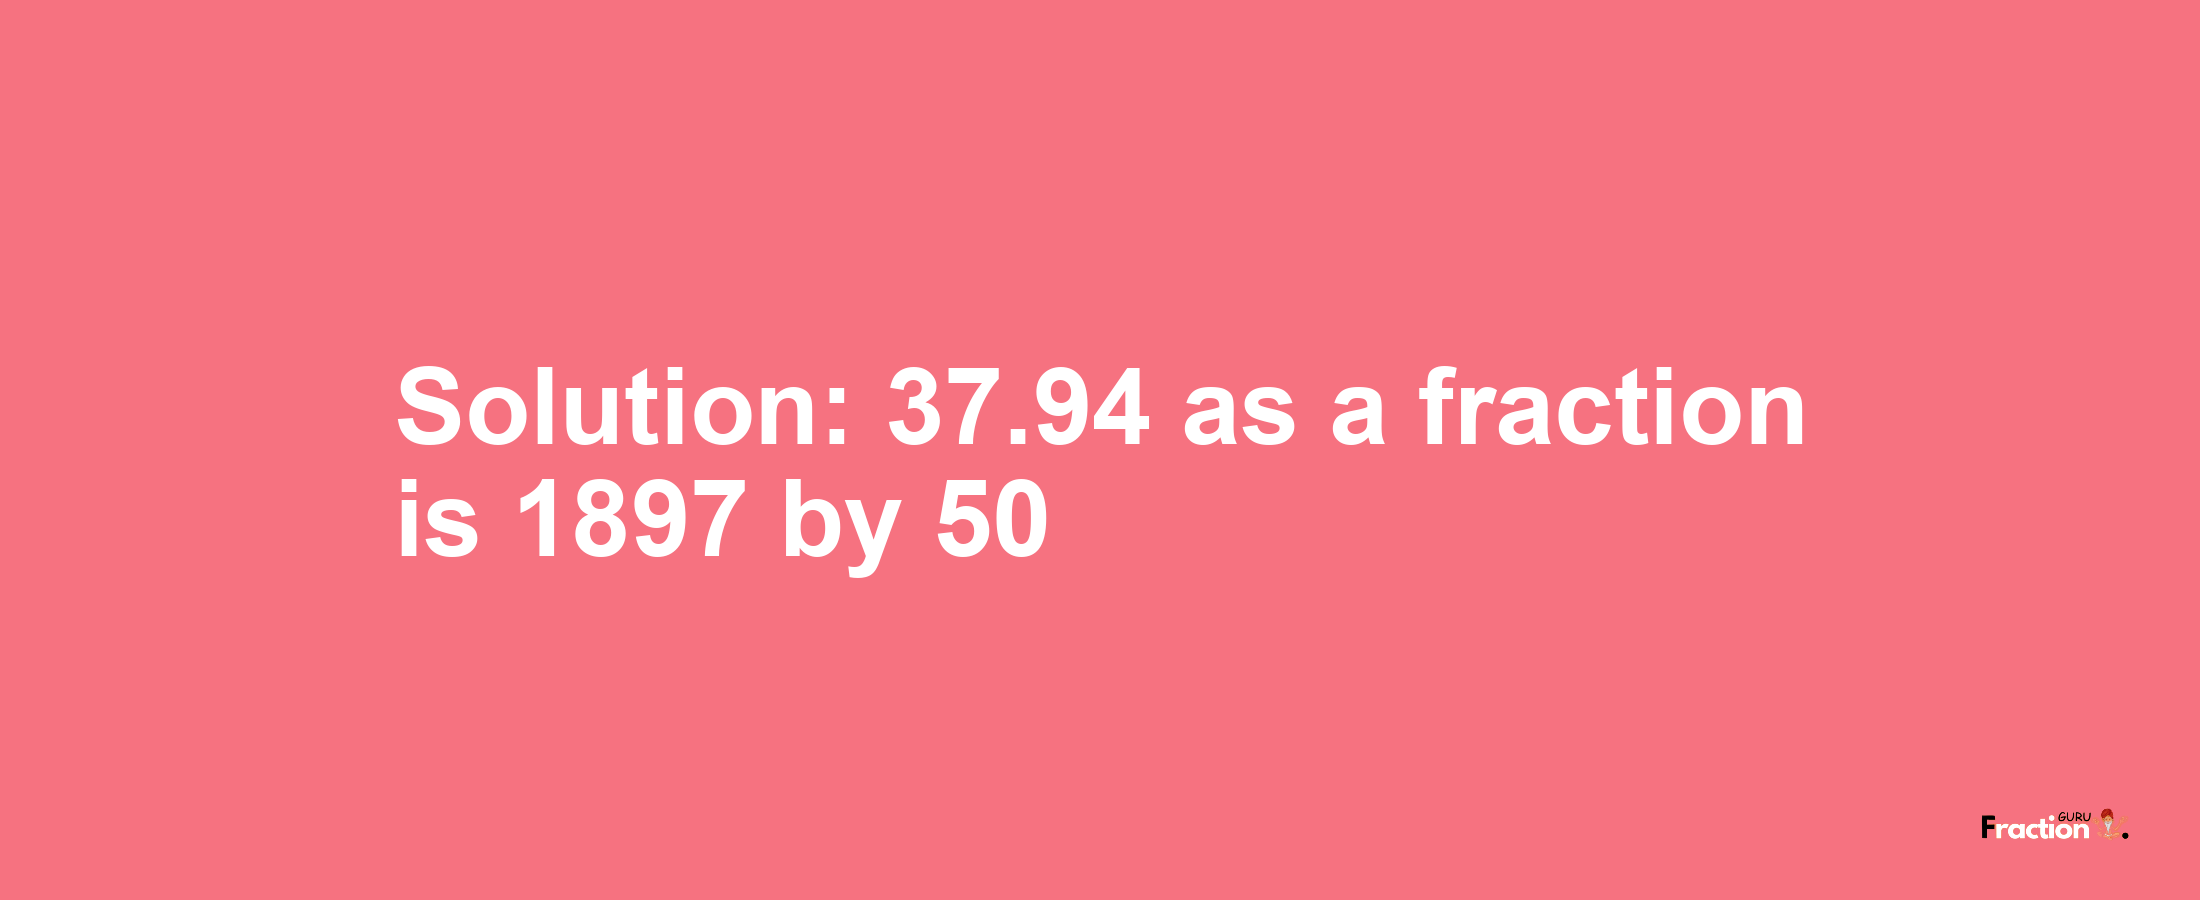 Solution:37.94 as a fraction is 1897/50